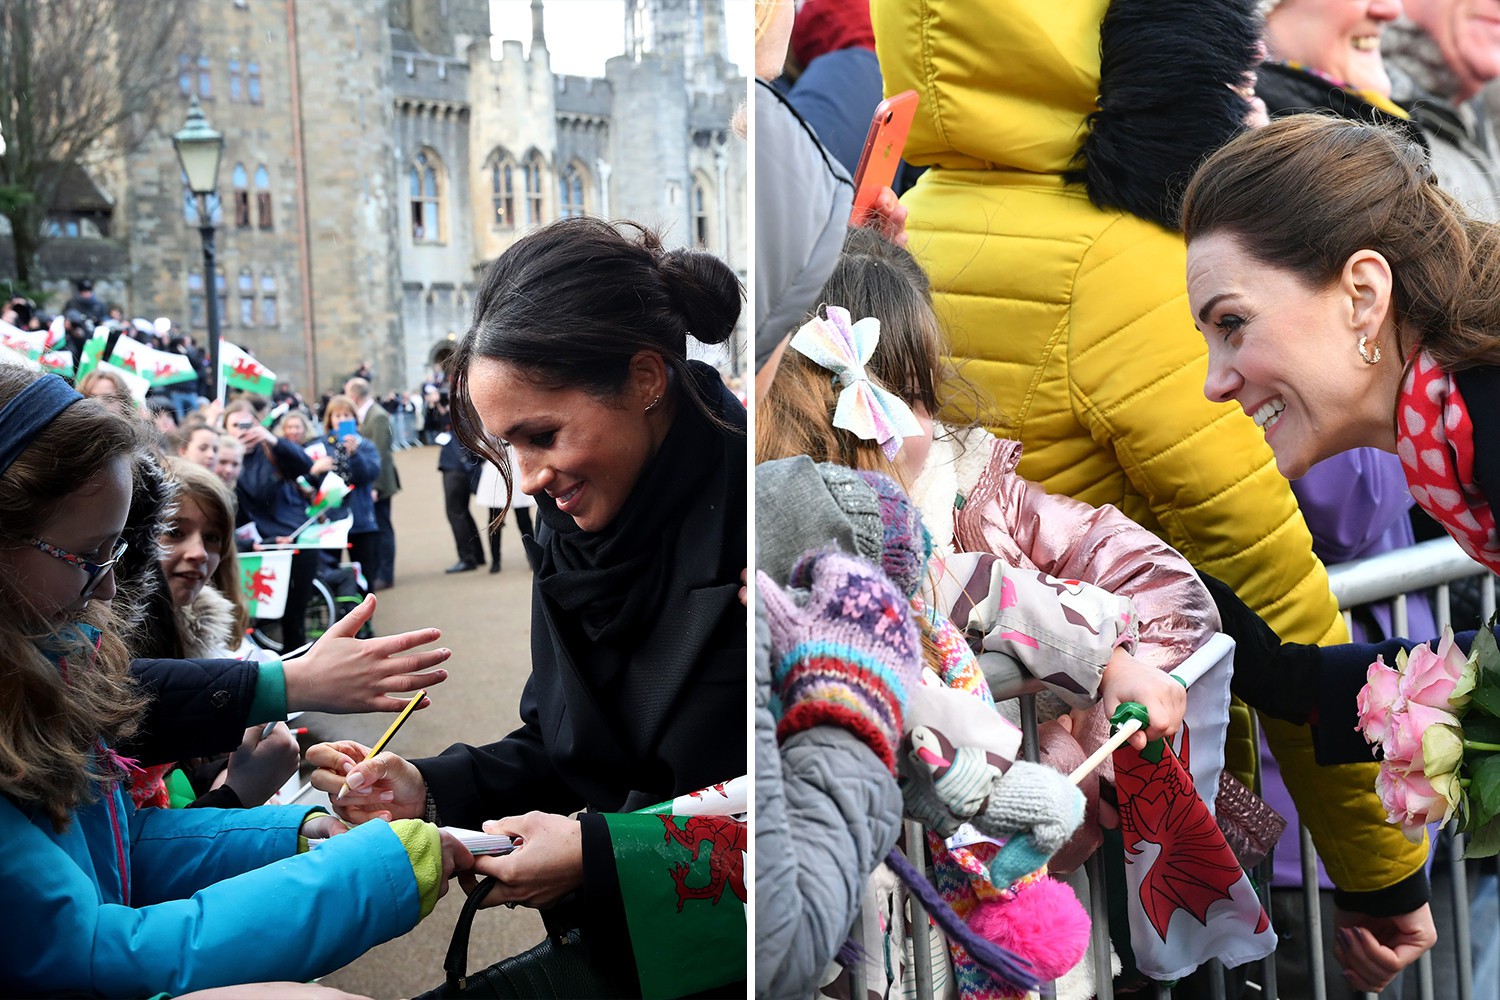 Meghan Markle giving a girl an autograph, Kate Middleton chatting to a little girl